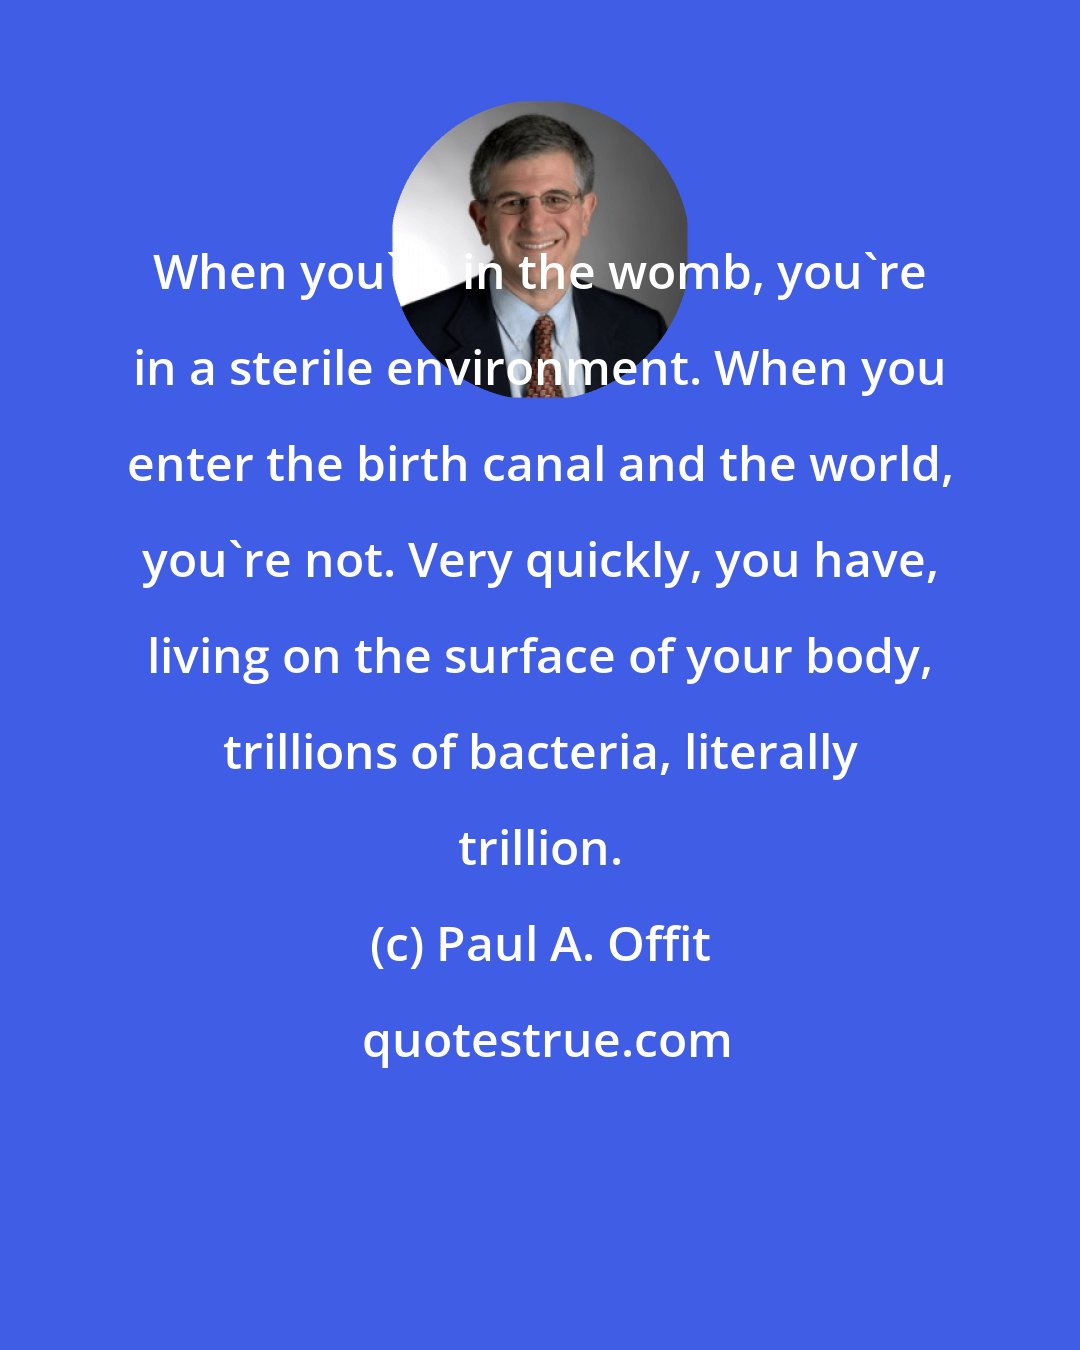 Paul A. Offit: When you're in the womb, you're in a sterile environment. When you enter the birth canal and the world, you're not. Very quickly, you have, living on the surface of your body, trillions of bacteria, literally trillion.